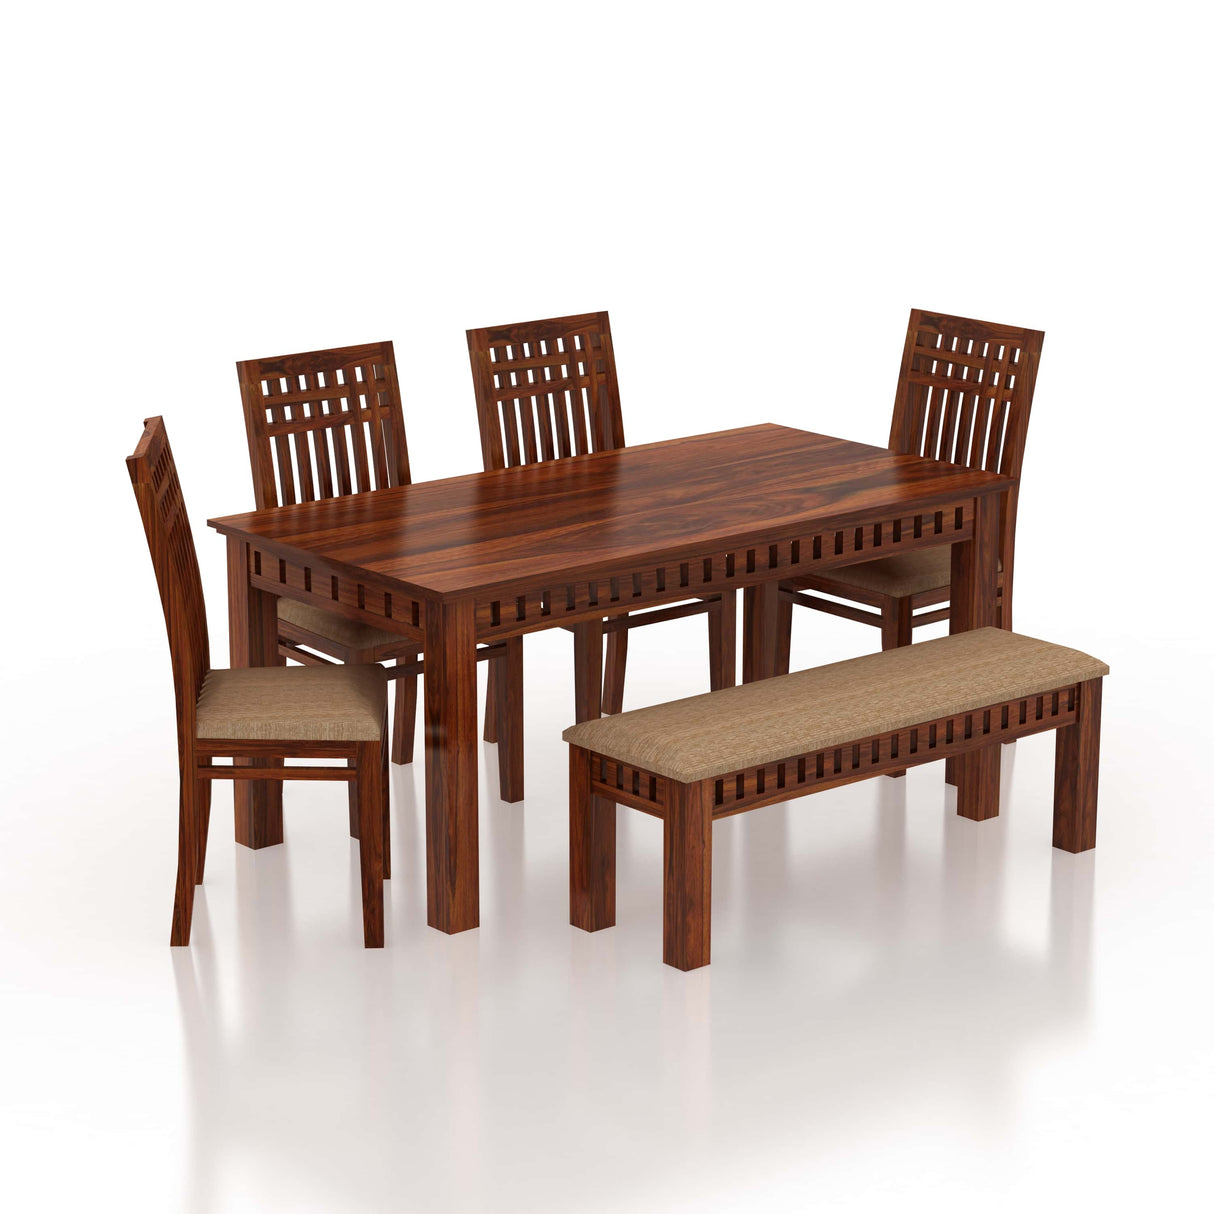 Armania Solid Sheesham Wood 6 Seater Dining Table Set - 1 Year Warranty